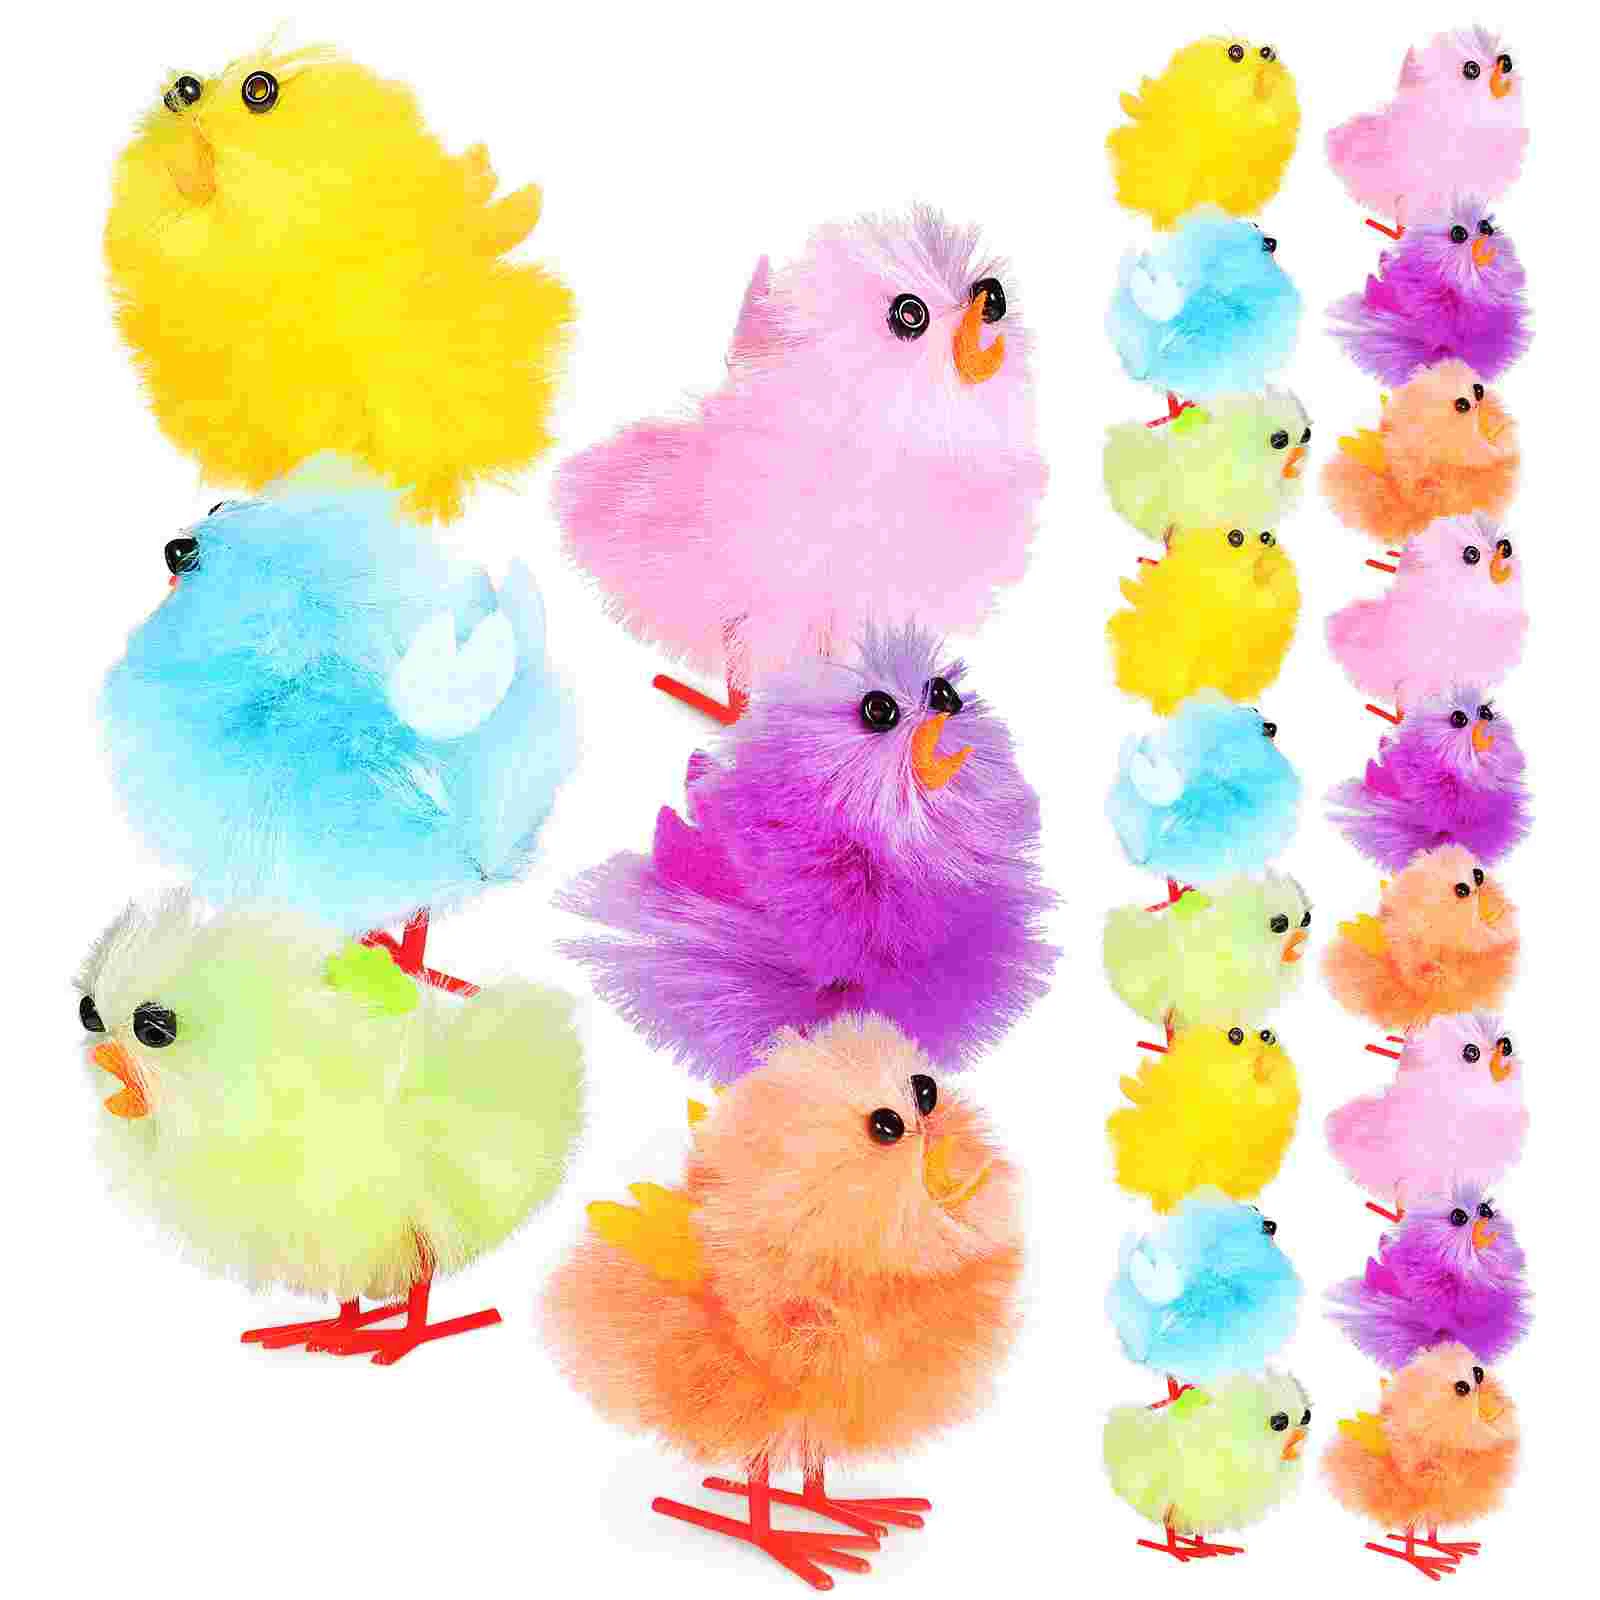 

36 Pcs Easter Chicks Colorful Baby Chicks Miniature Fluffy Chick Toys for Kids Party Favors Ornaments